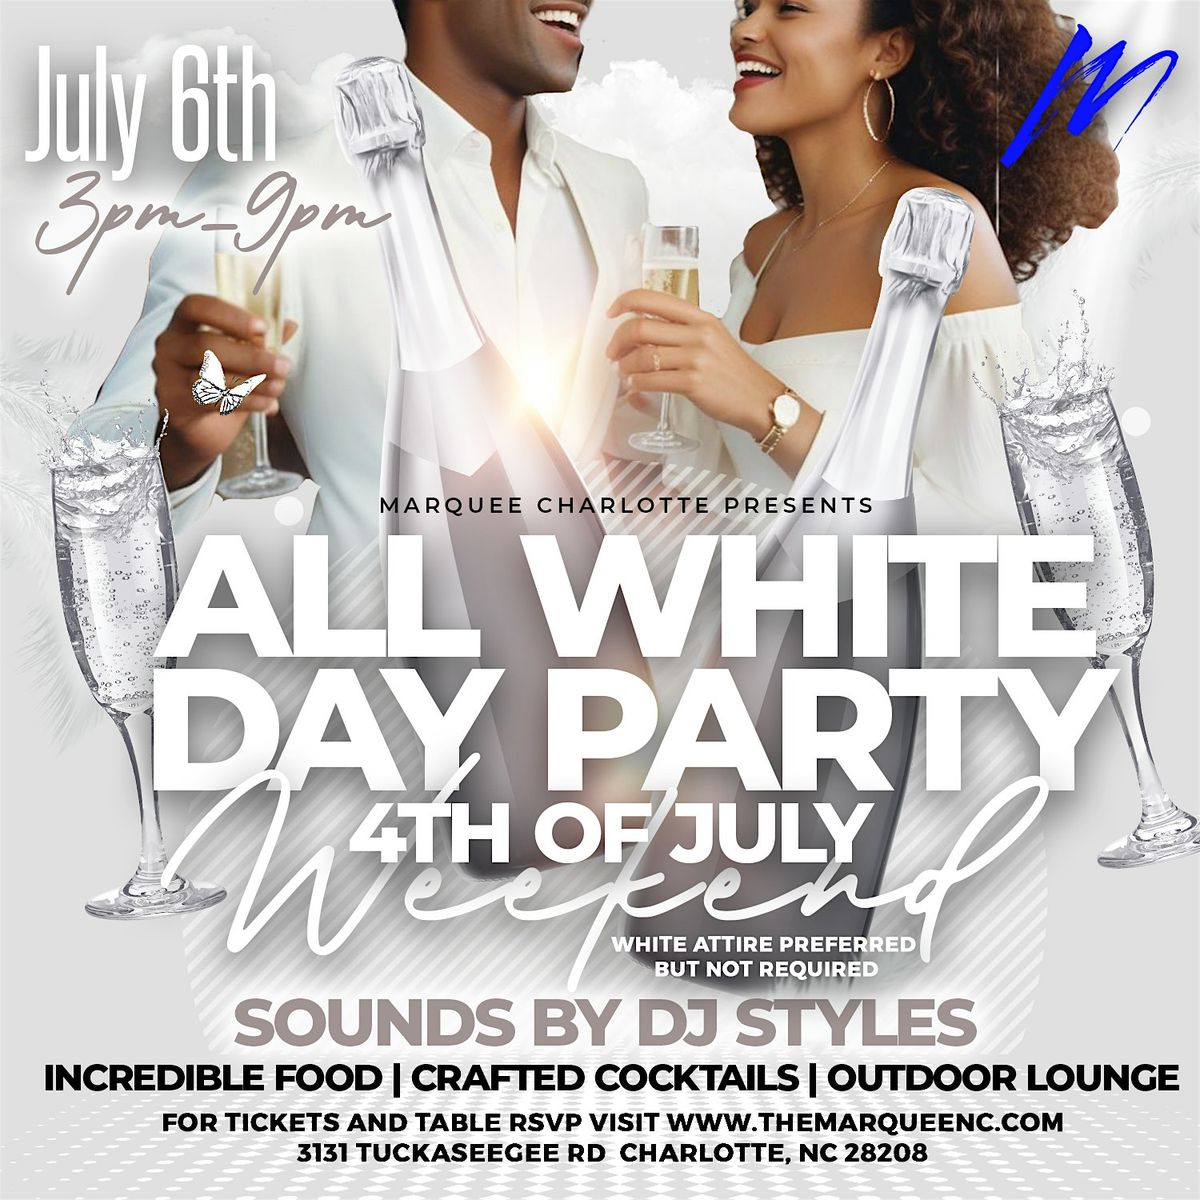 All White Day Party At Marquee Charlotte